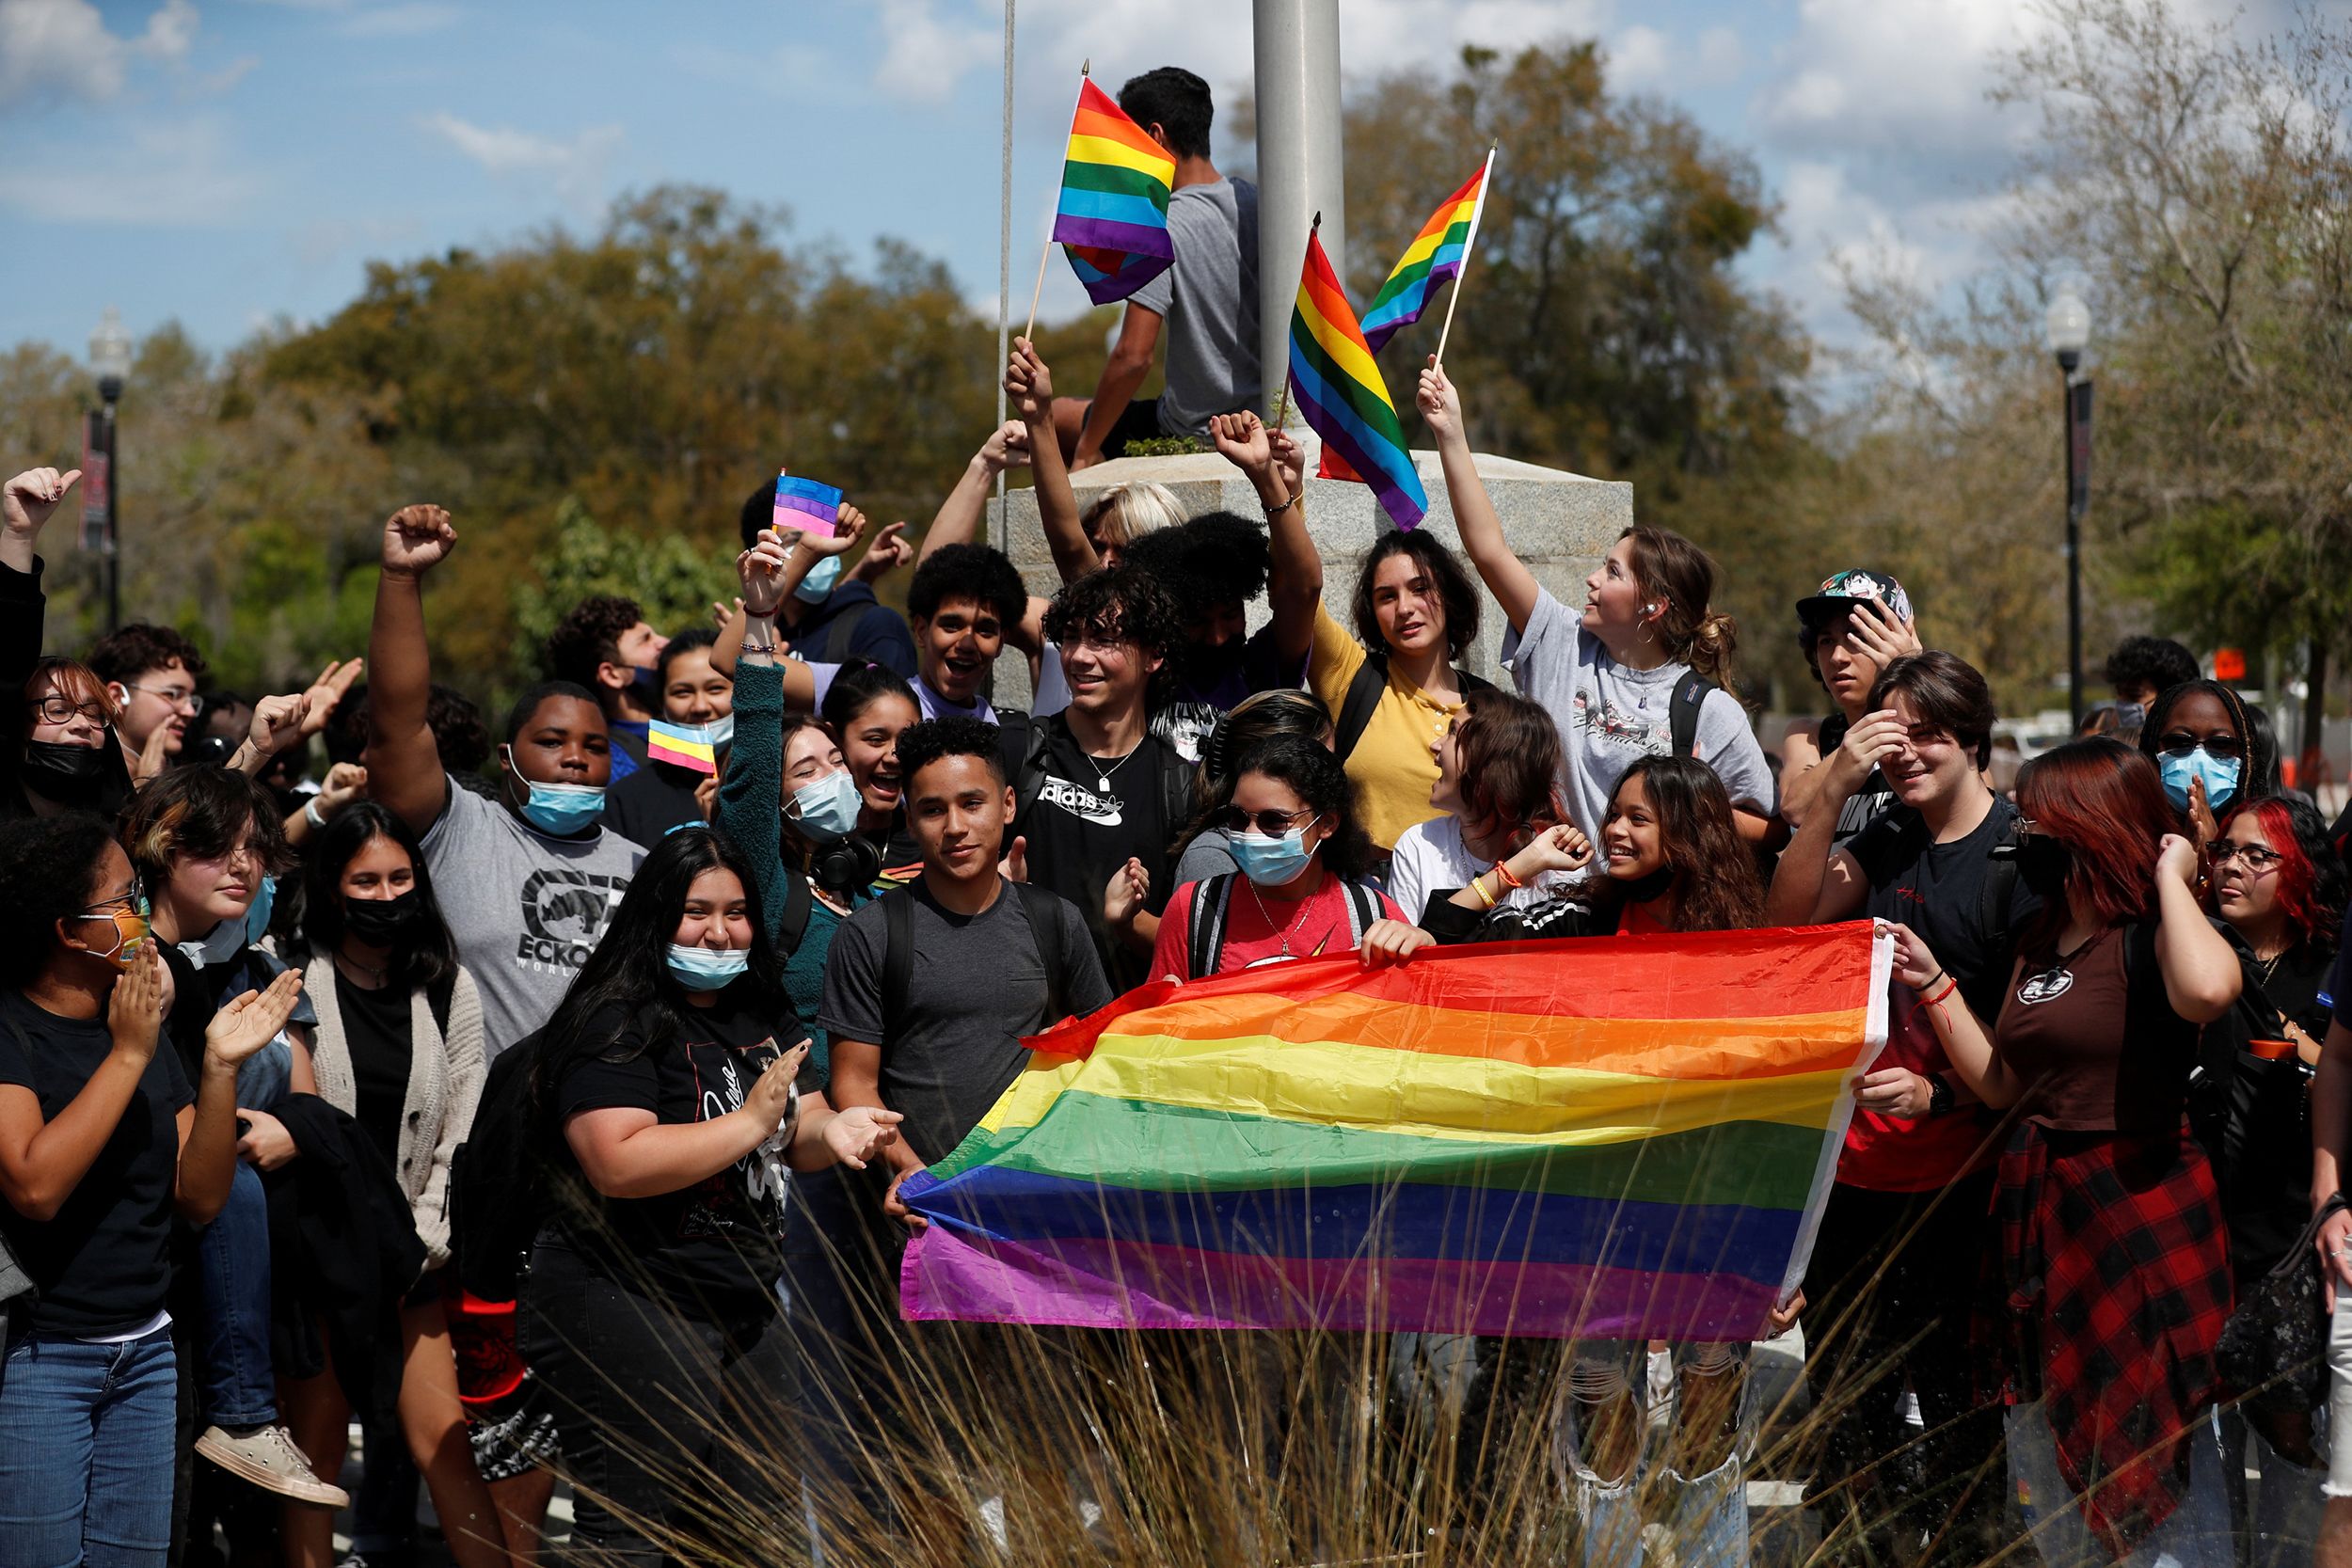 Florida teachers can discuss sexuality and gender identity in some classroom settings, legal settlement clarifies - Education - News